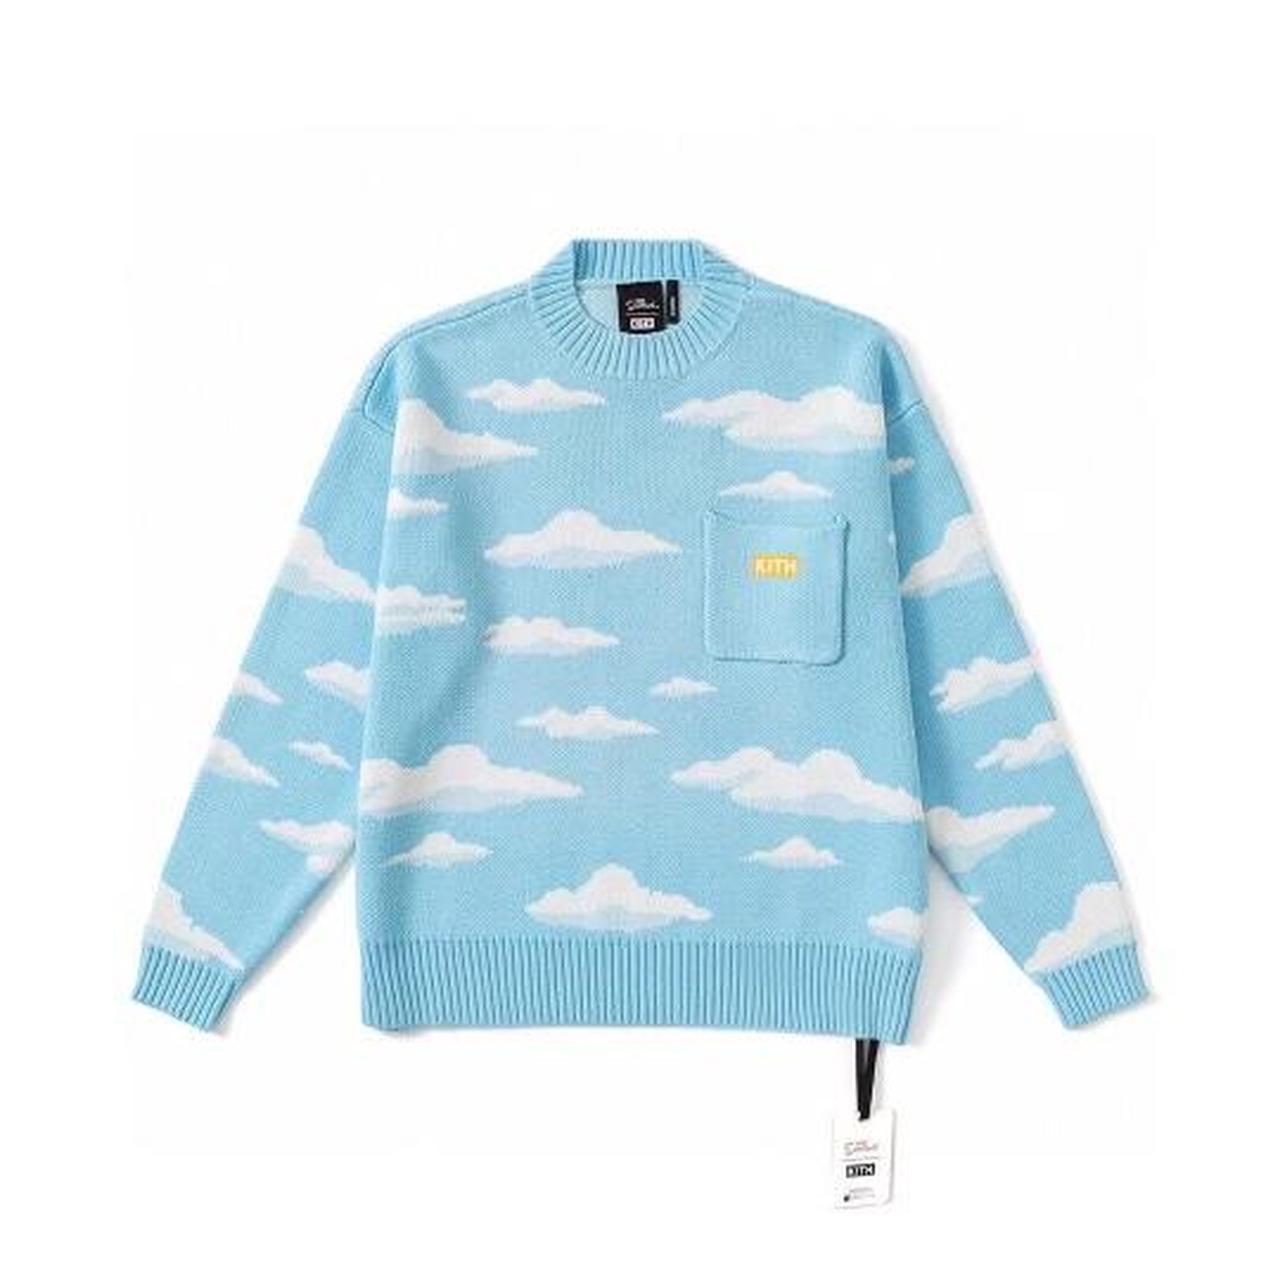 Kith X The Simpsons sweater ☁️, Used ONCE but in